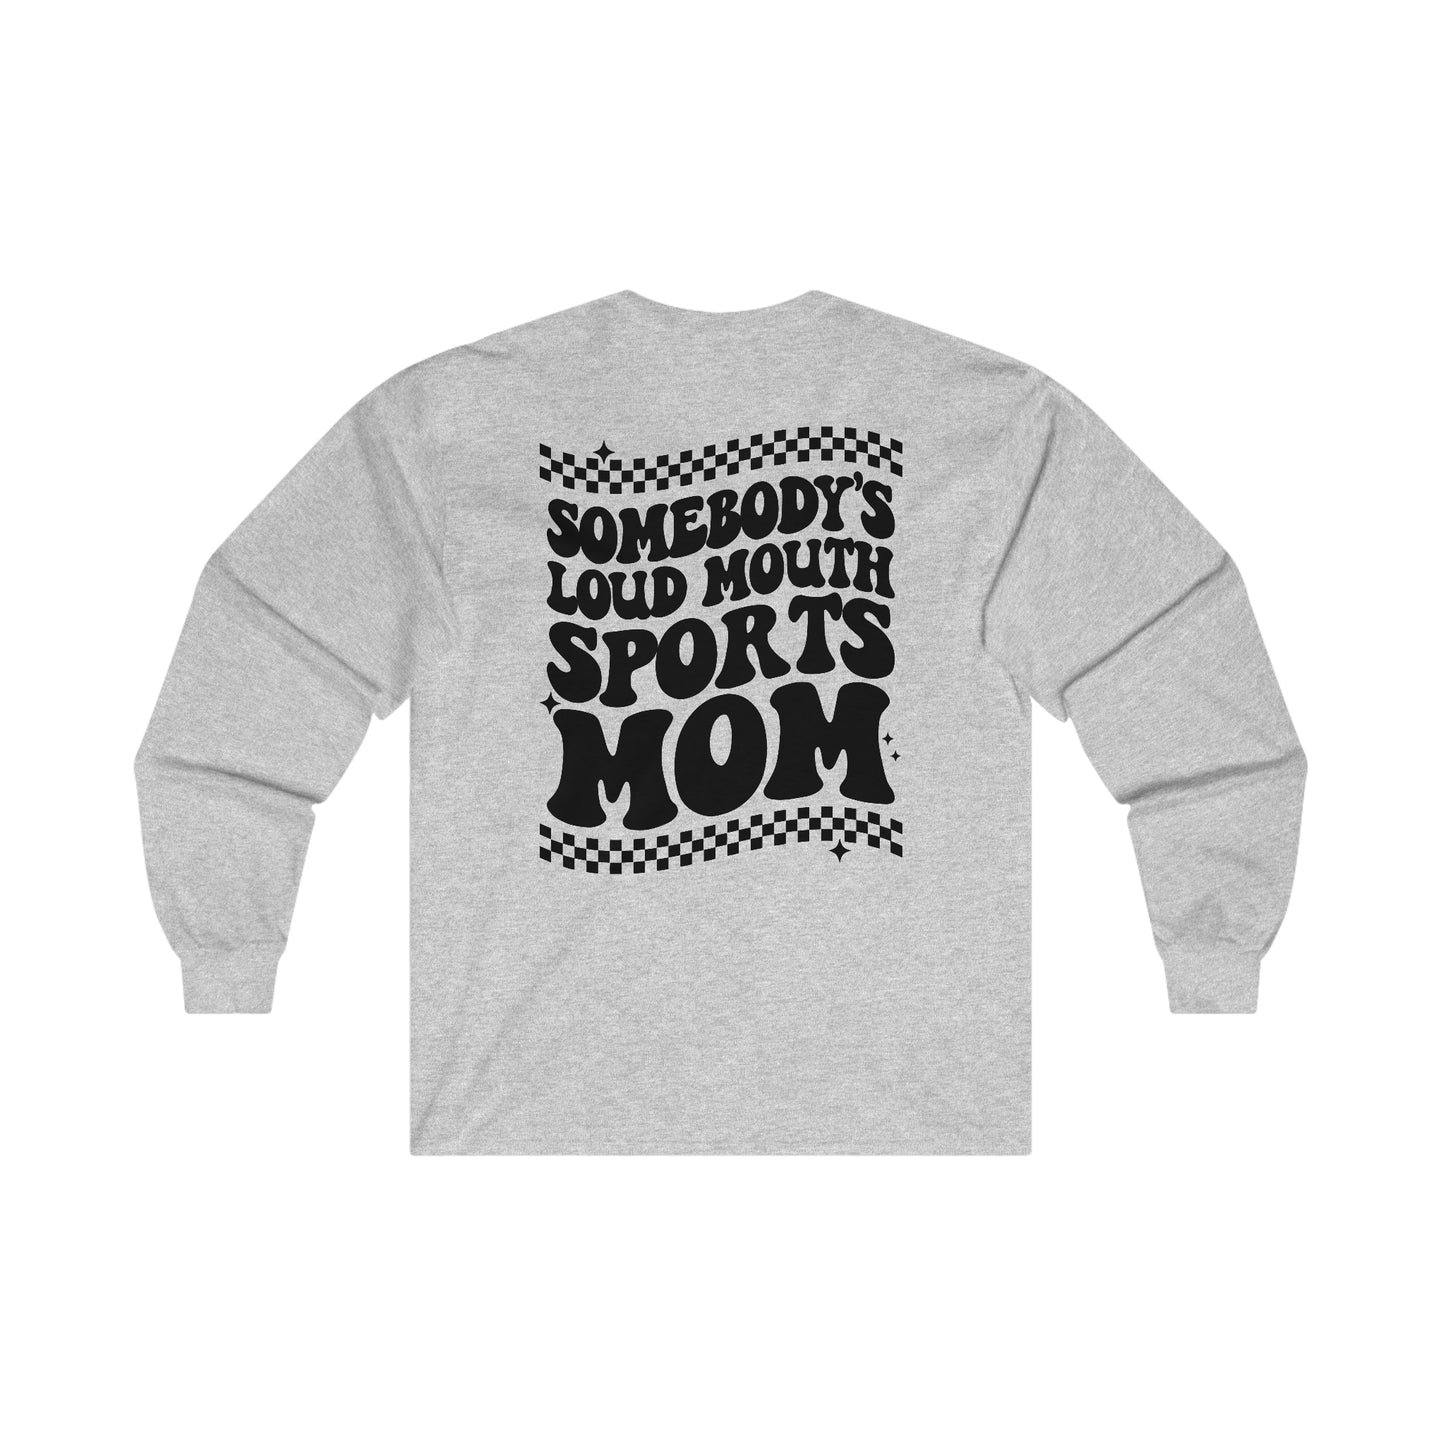 Loud Mouth Sports Mom - Unisex Ultra Cotton Long Sleeve Tee